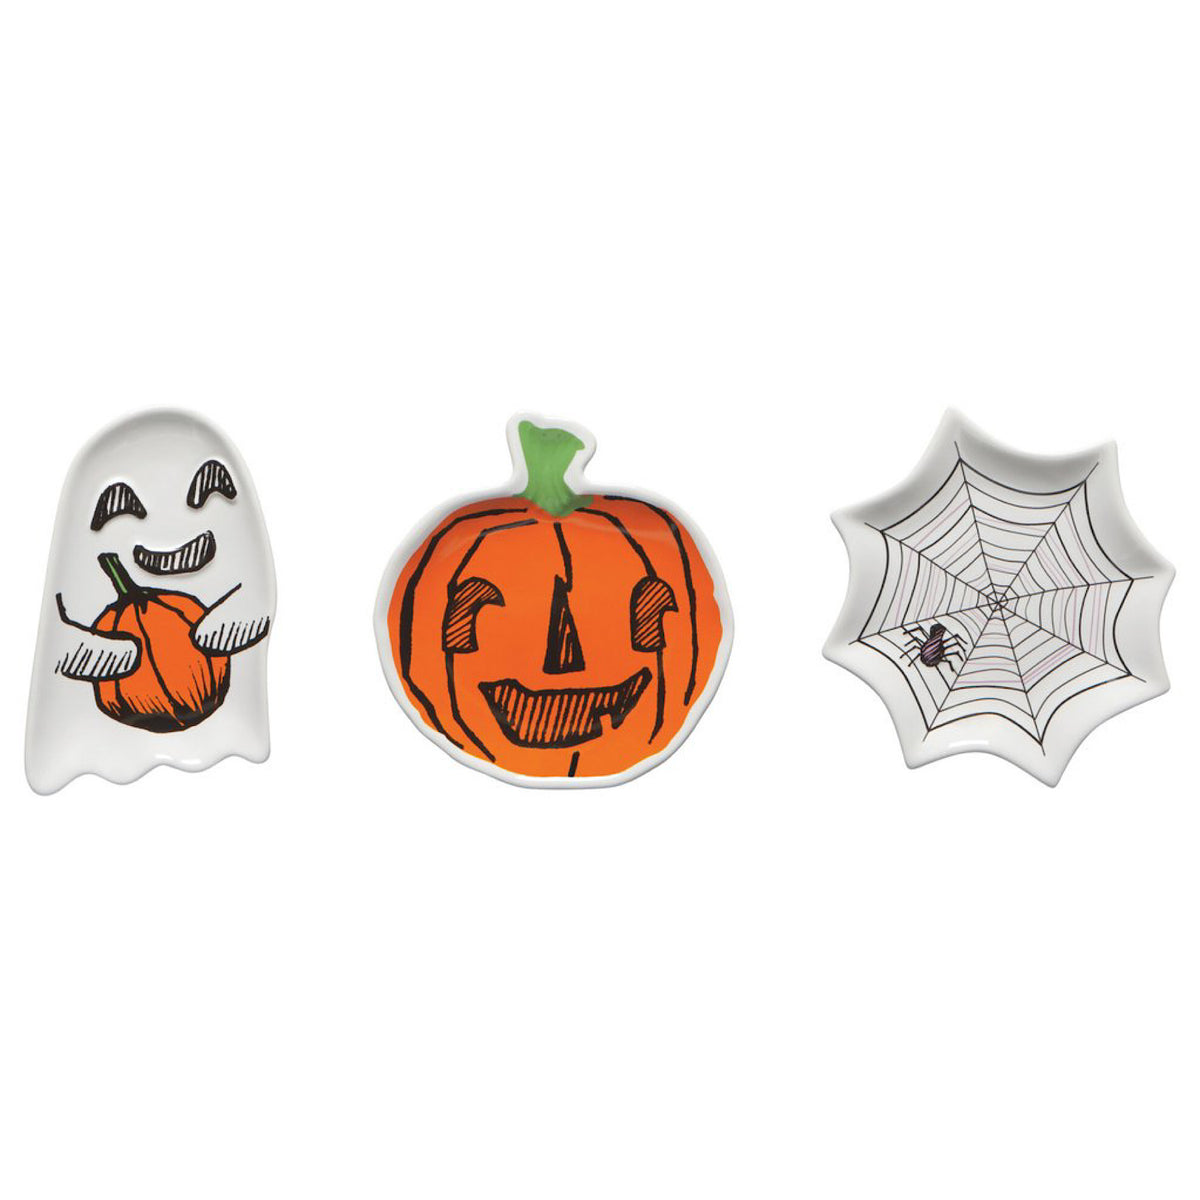 Spooktacular Shaped Dishes, Set of 3